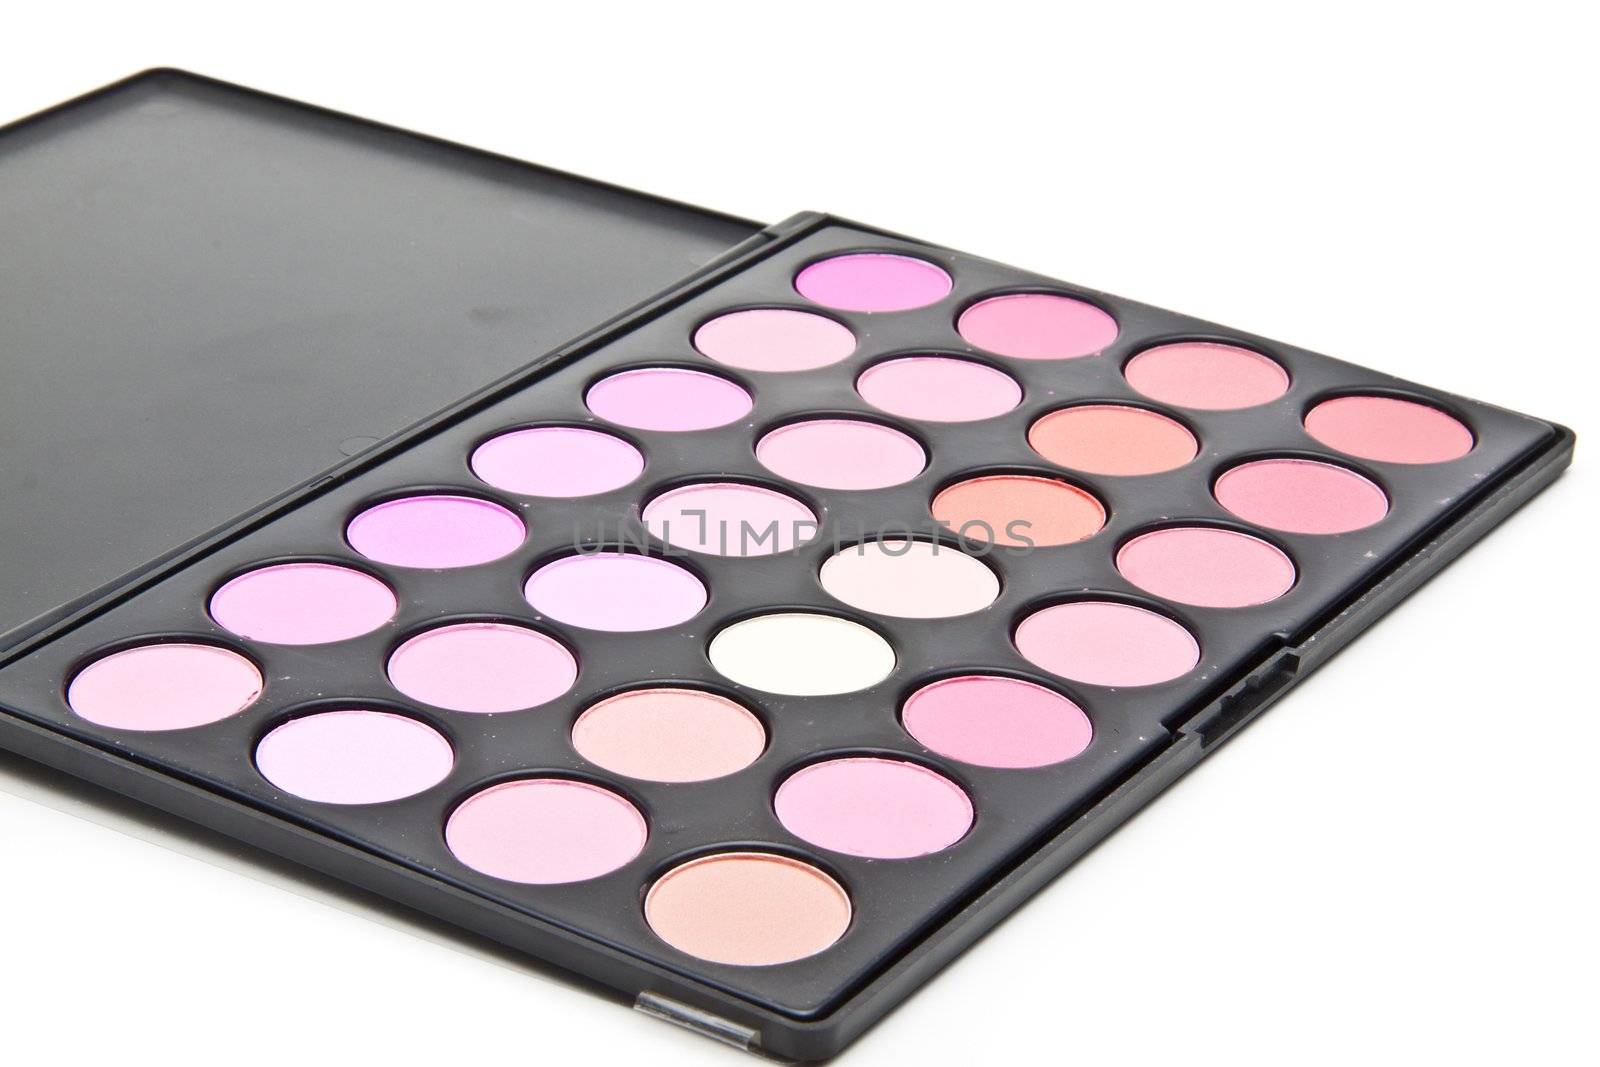 Makeup set. Professional multicolor eyeshadow palette by ozaiachin